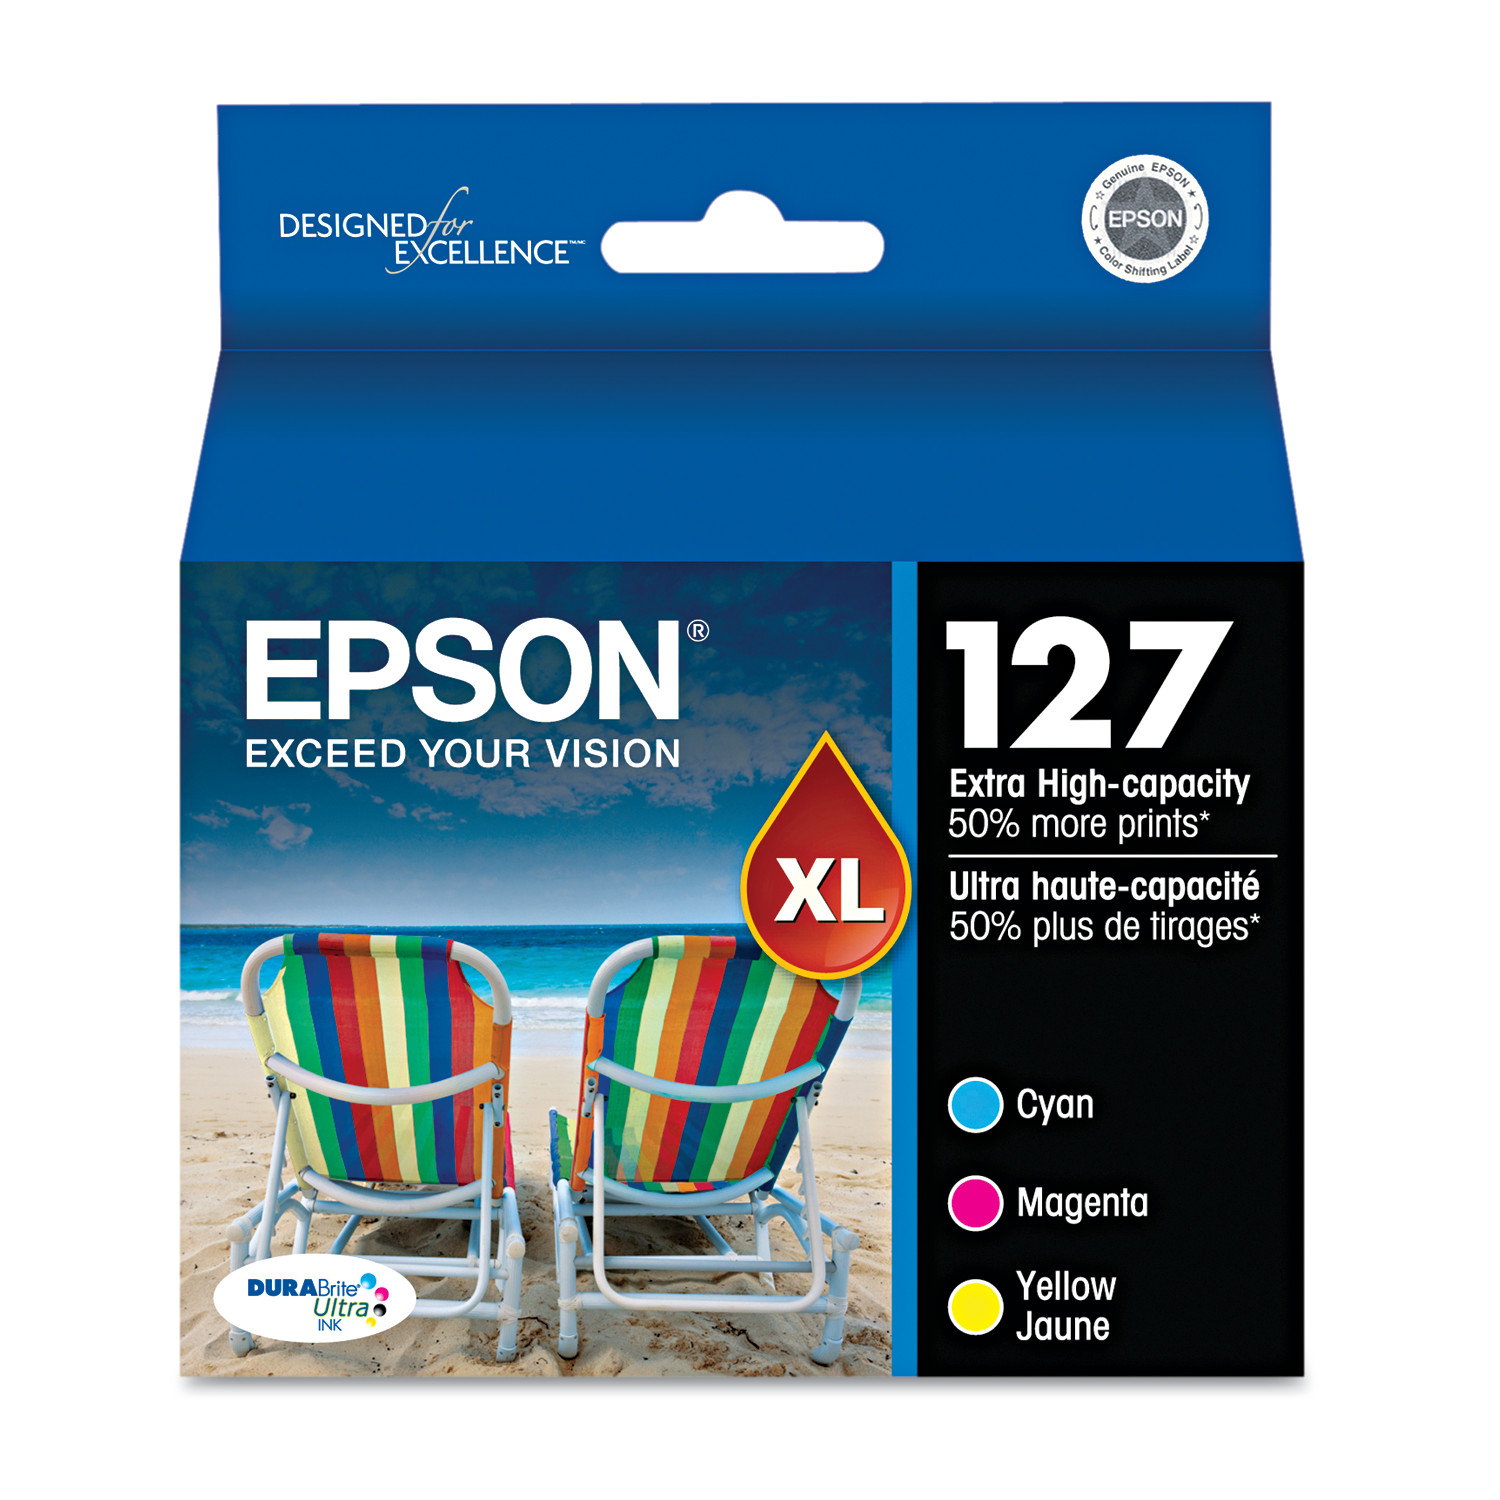 EPSON 127 DURABrite Ultra Ink Color Combo Pack For NX-530, NX-625,  WF-3520, WF-3530, WF-3540, WF-545, WF-60, WF-630, WF-633, WF-635, WF-645, WF-7010, WF-7510, WF-7520, WF-840, WF-845 - image 1 of 6